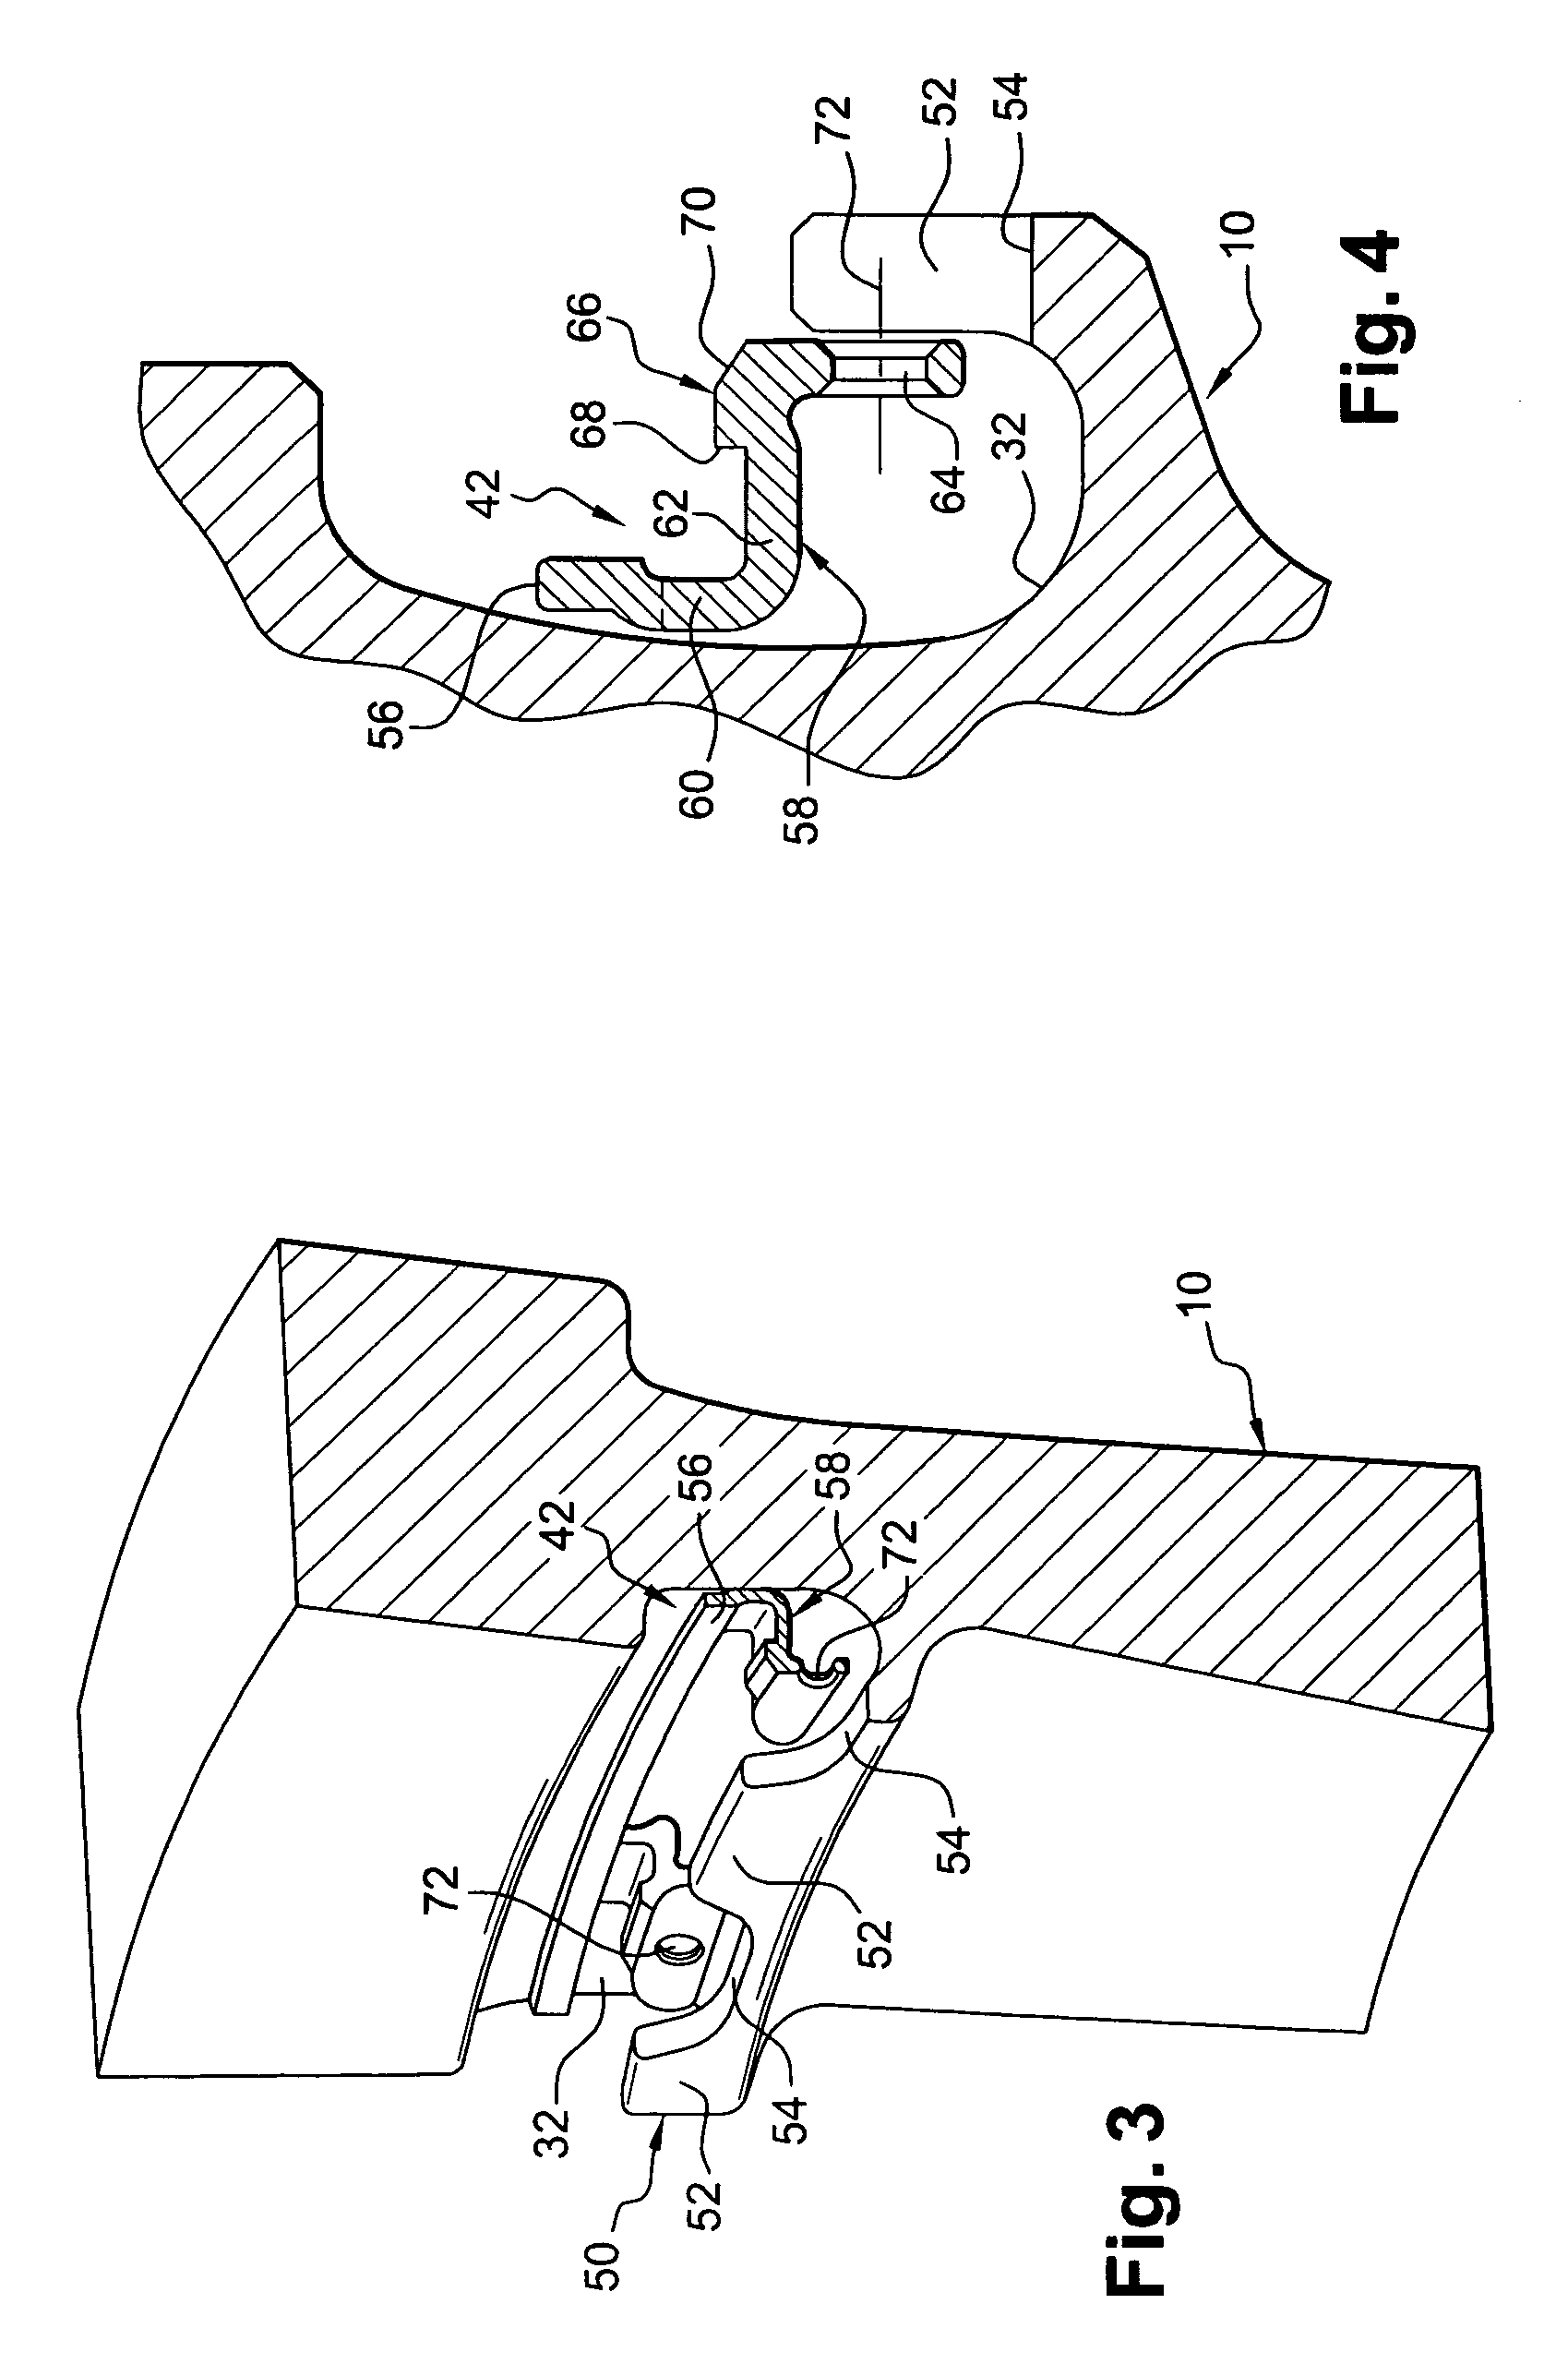 Device for axially retaining blades on a turbomachine rotor disk